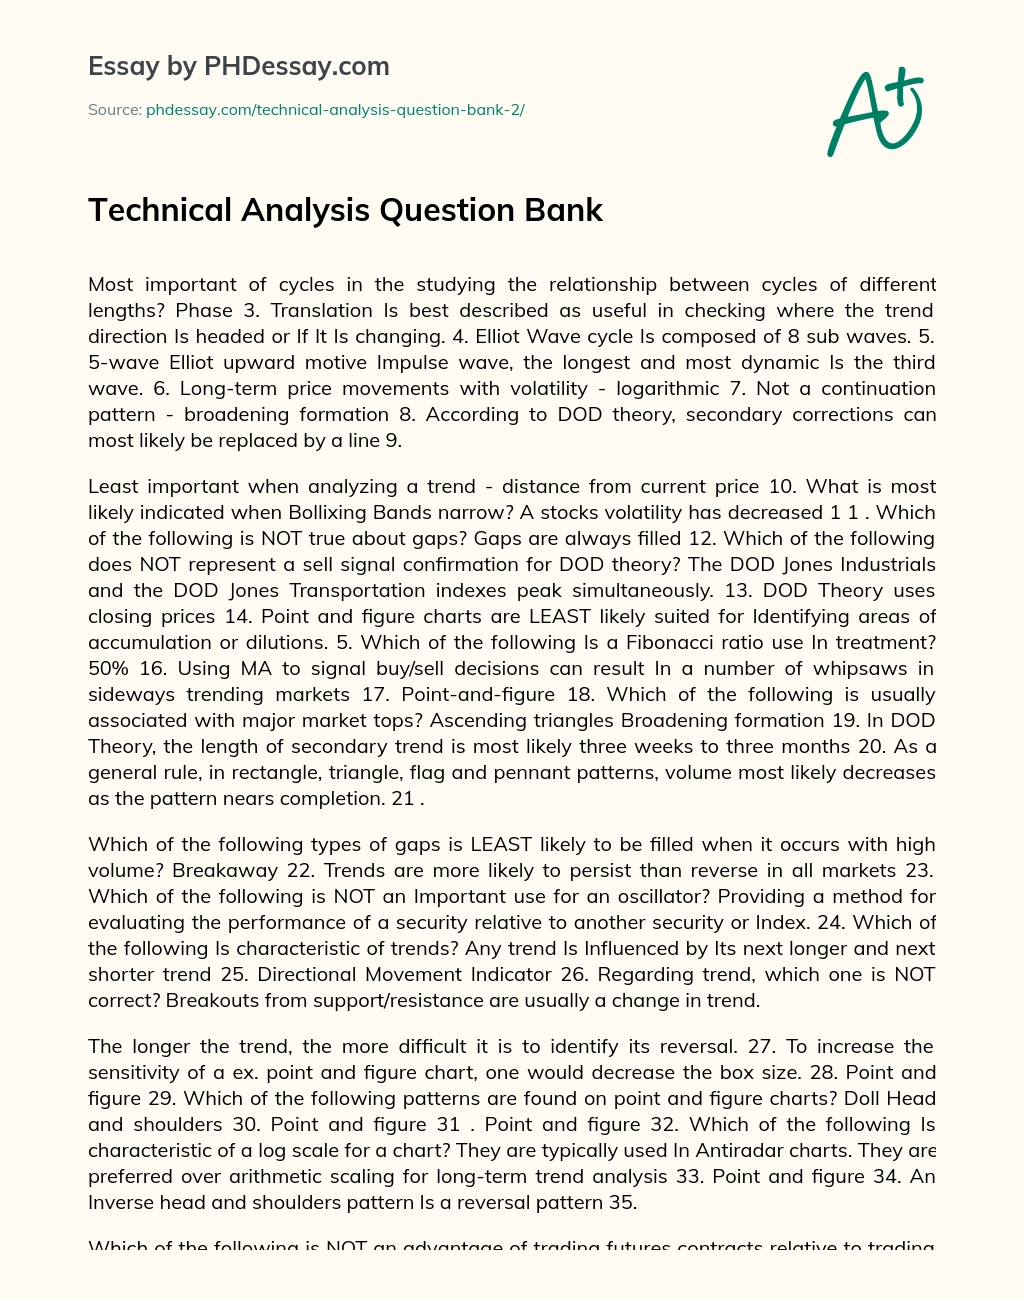 Technical Analysis Question Bank essay